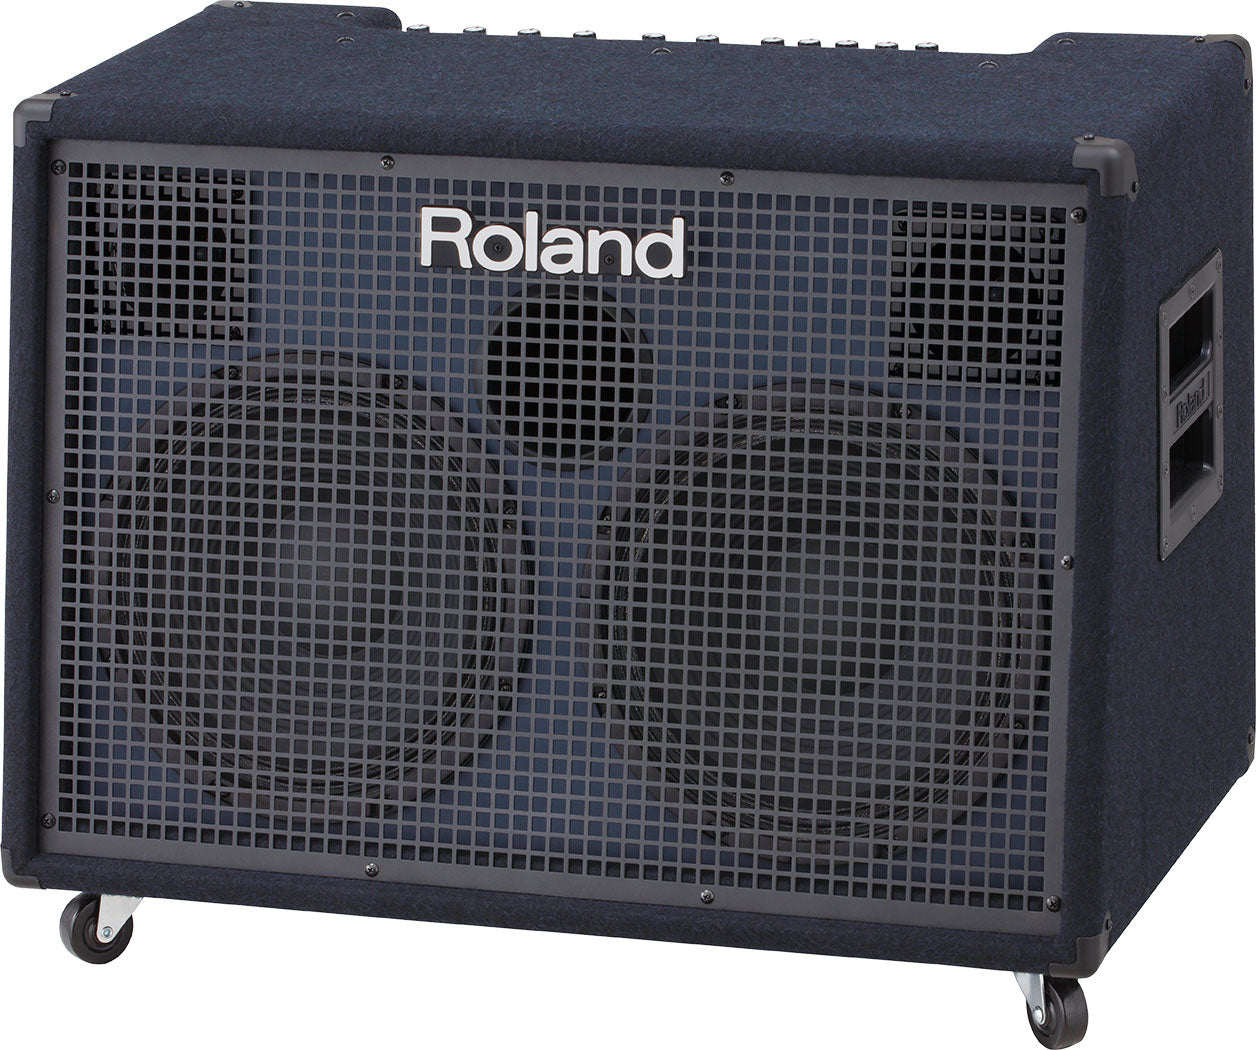 Roland KC-990 Stereo Mixing Keyboard Amplifier